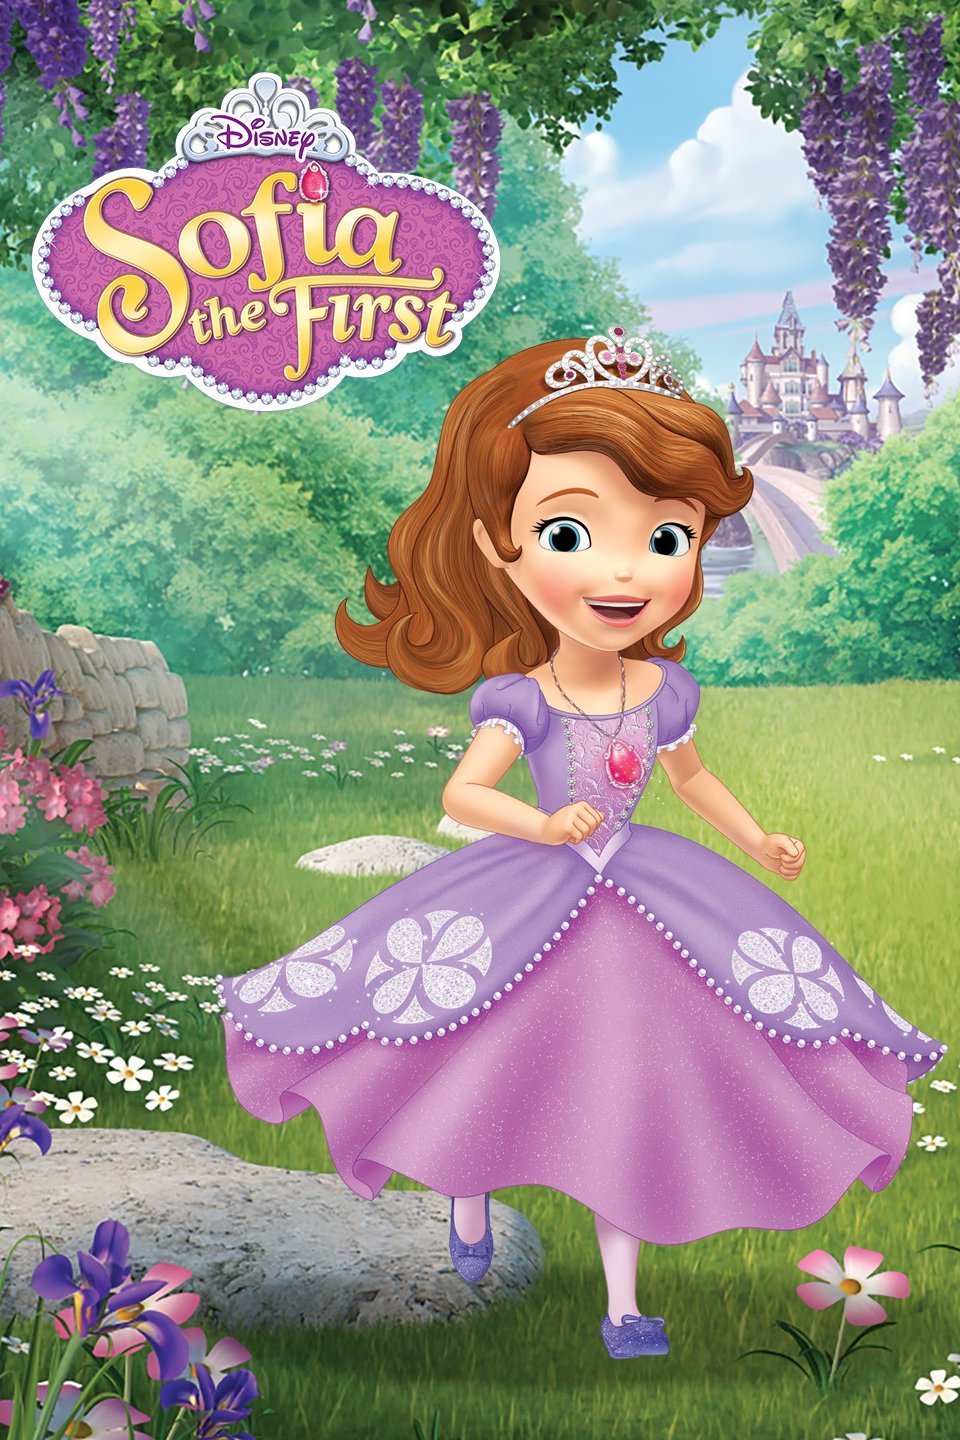 Sofia The First Rotten Tomatoes